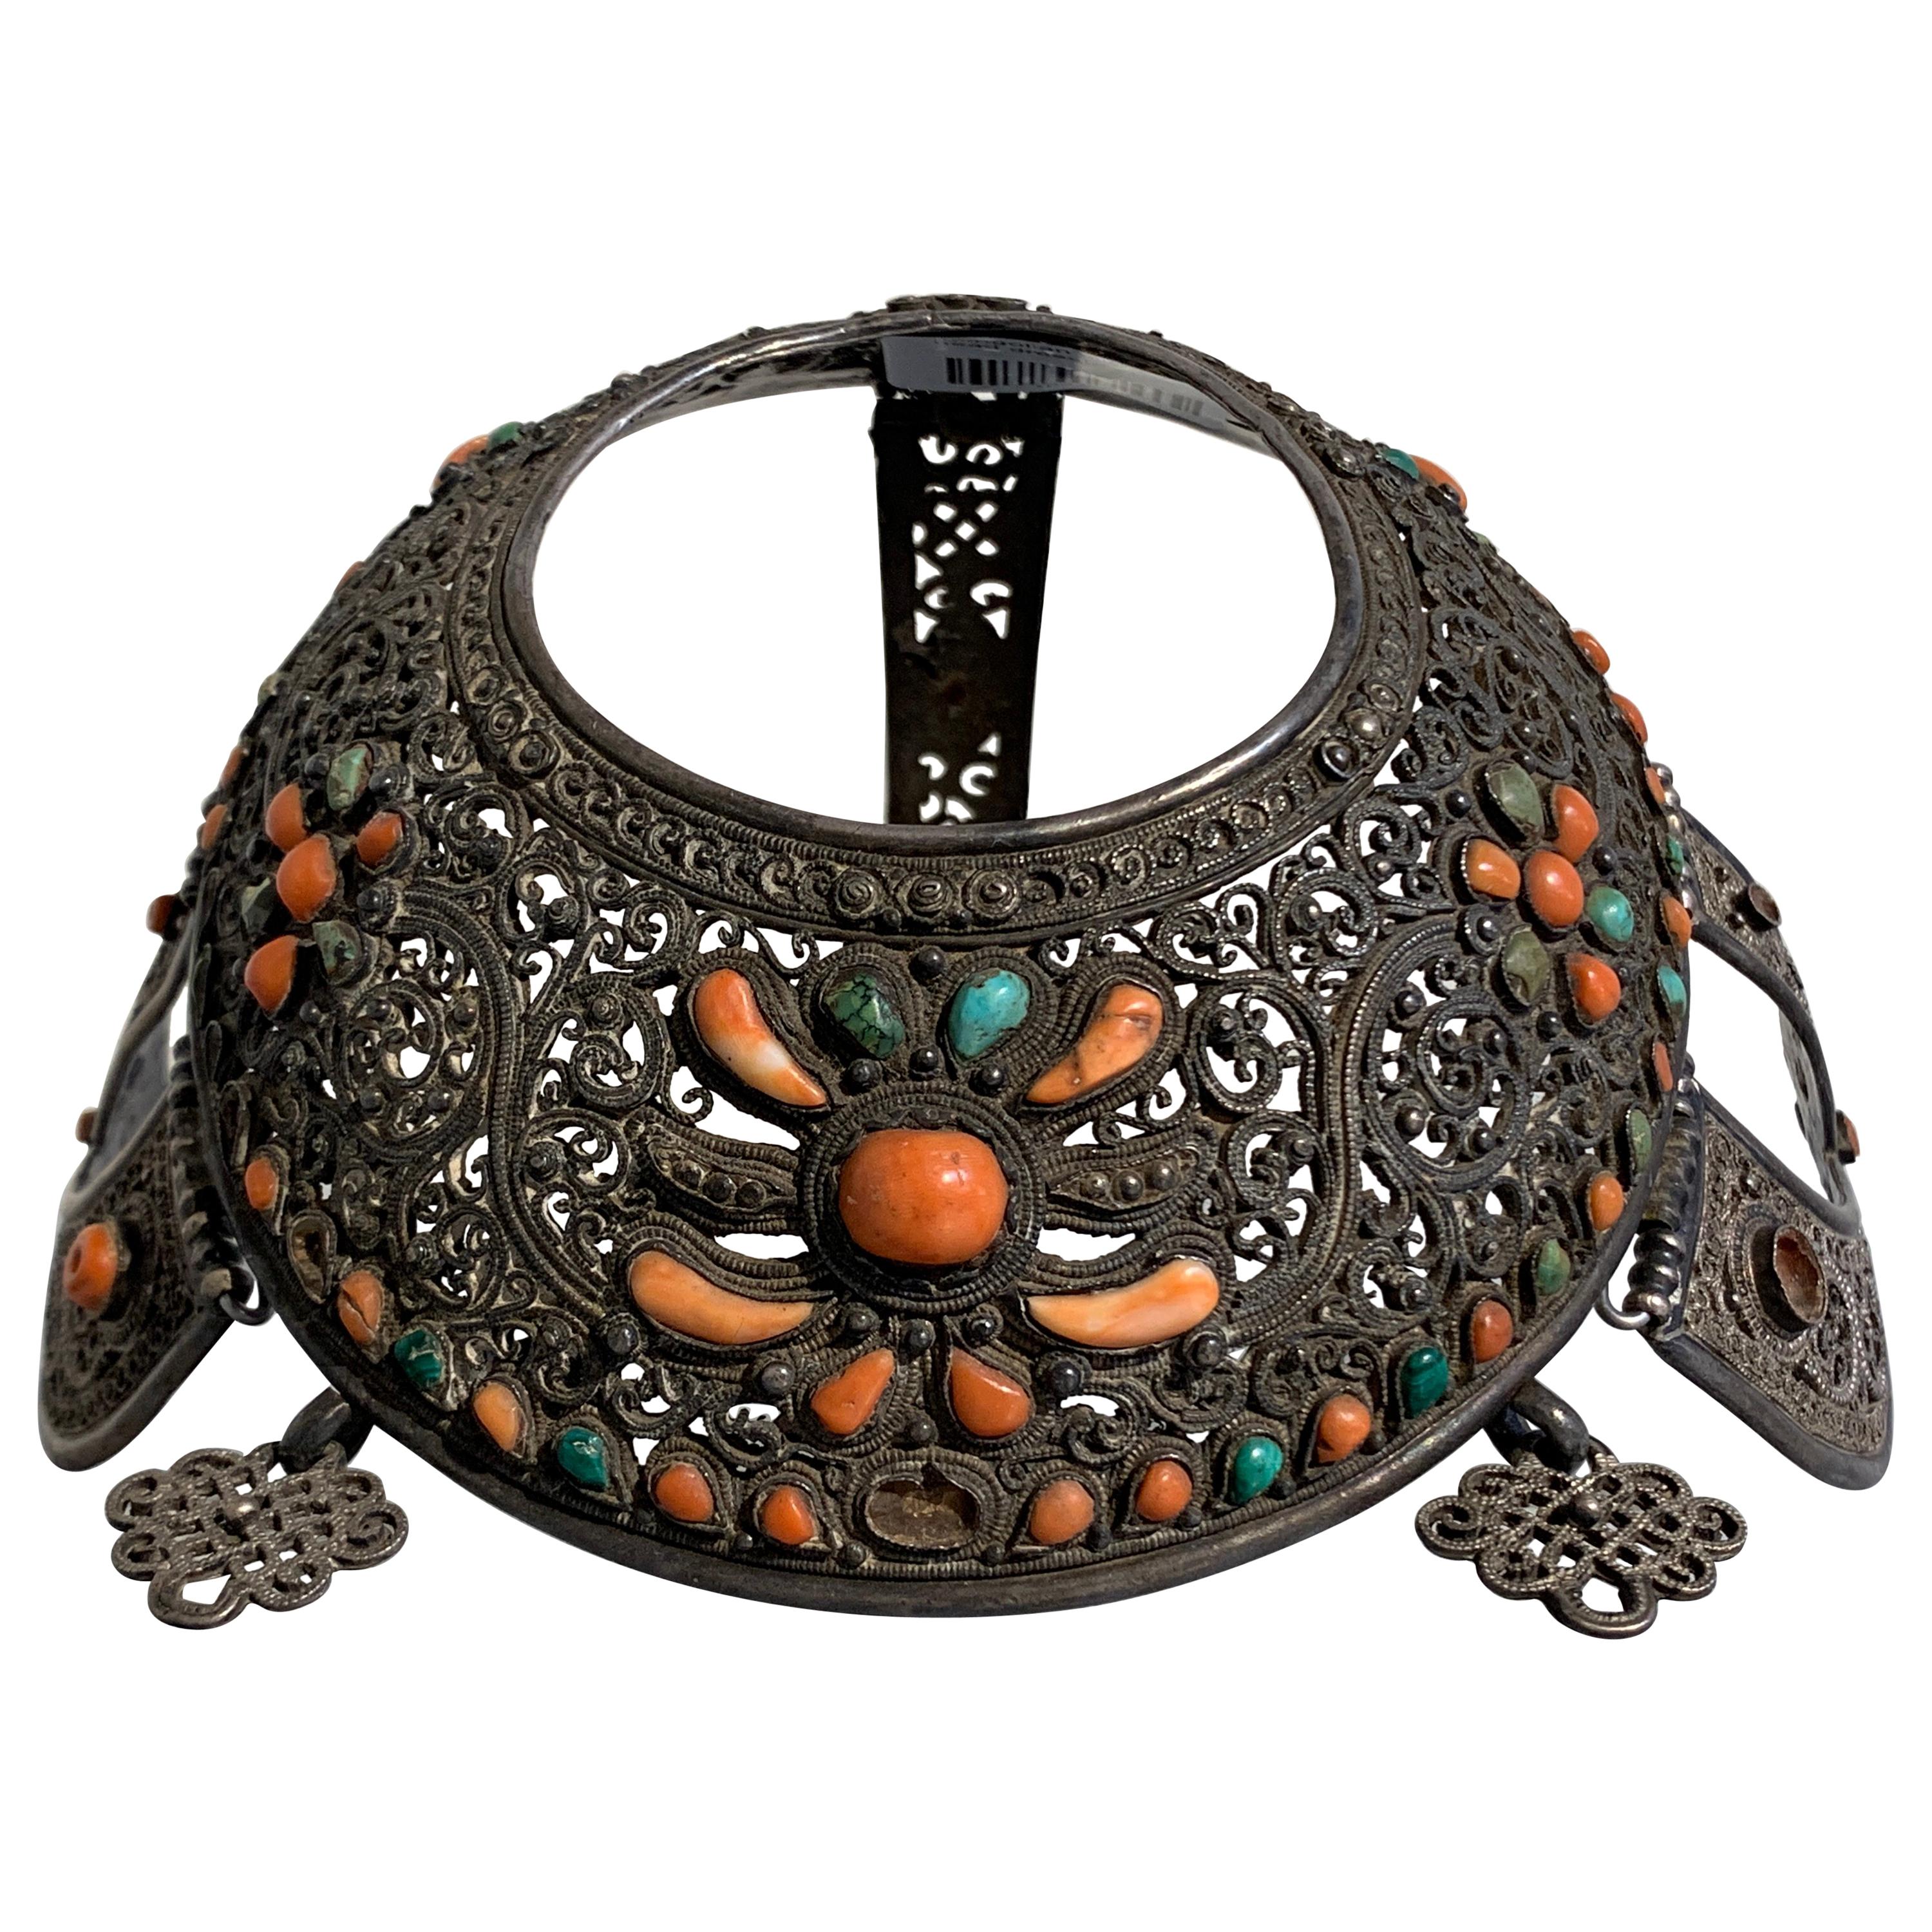 Mongolian Silver Crown Headdress with Inlaid Coral and Turquoise, 19th Century